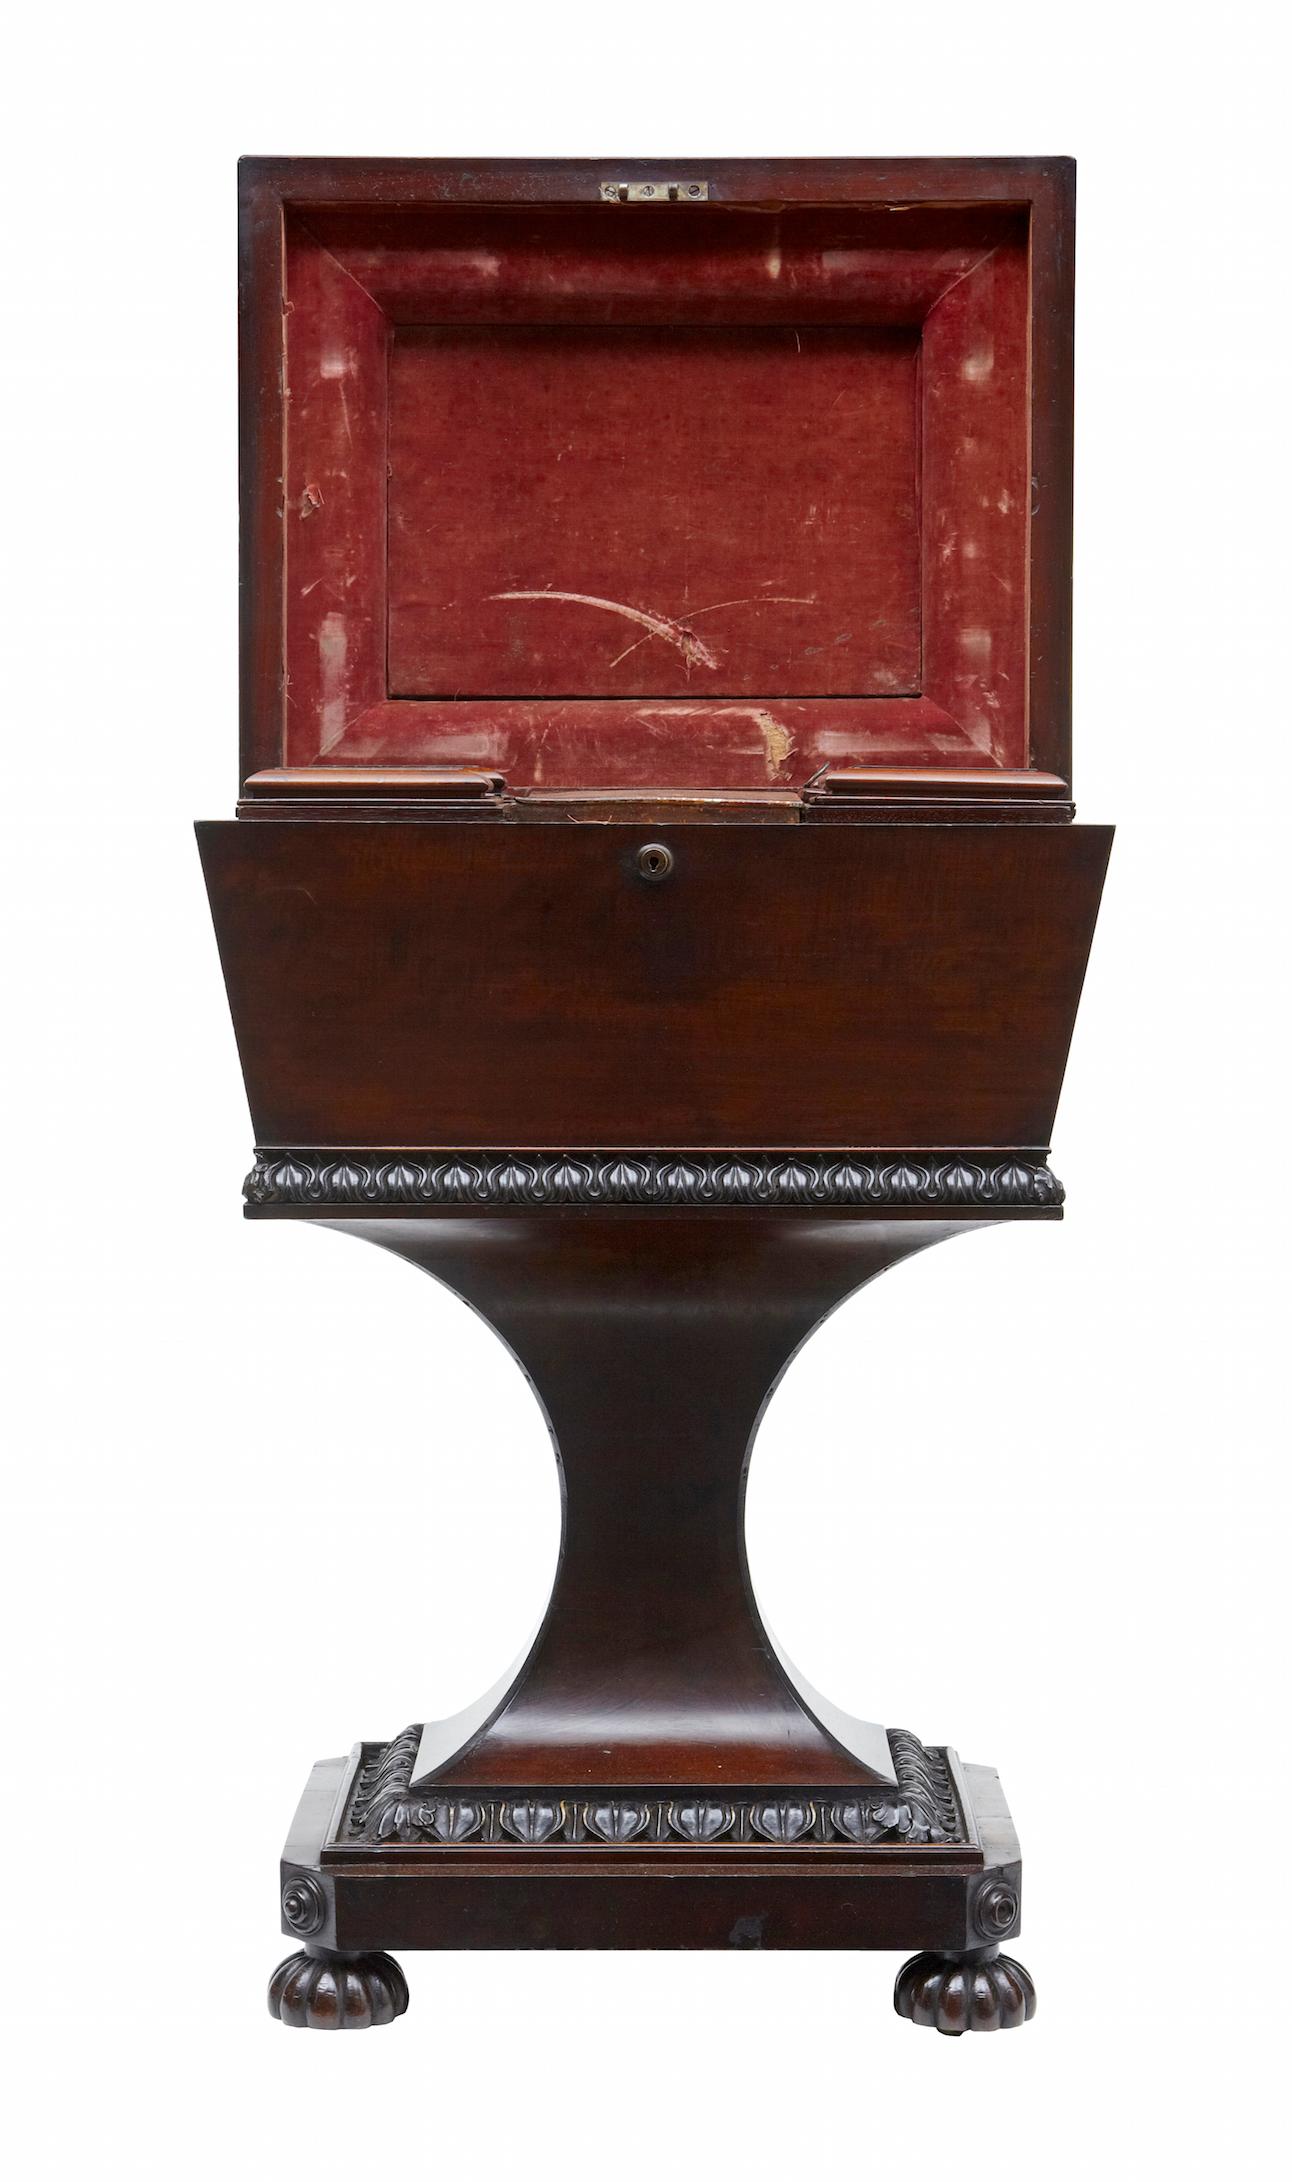 Superb quality Gillows Regency mahogany teapoy circa 1820. 

The main body being of sarcophagus form, which opens to 4 mahogany slides on each corner, 1 large tole compartment flanked either side by a smaller caddy. Original velvet lining to the